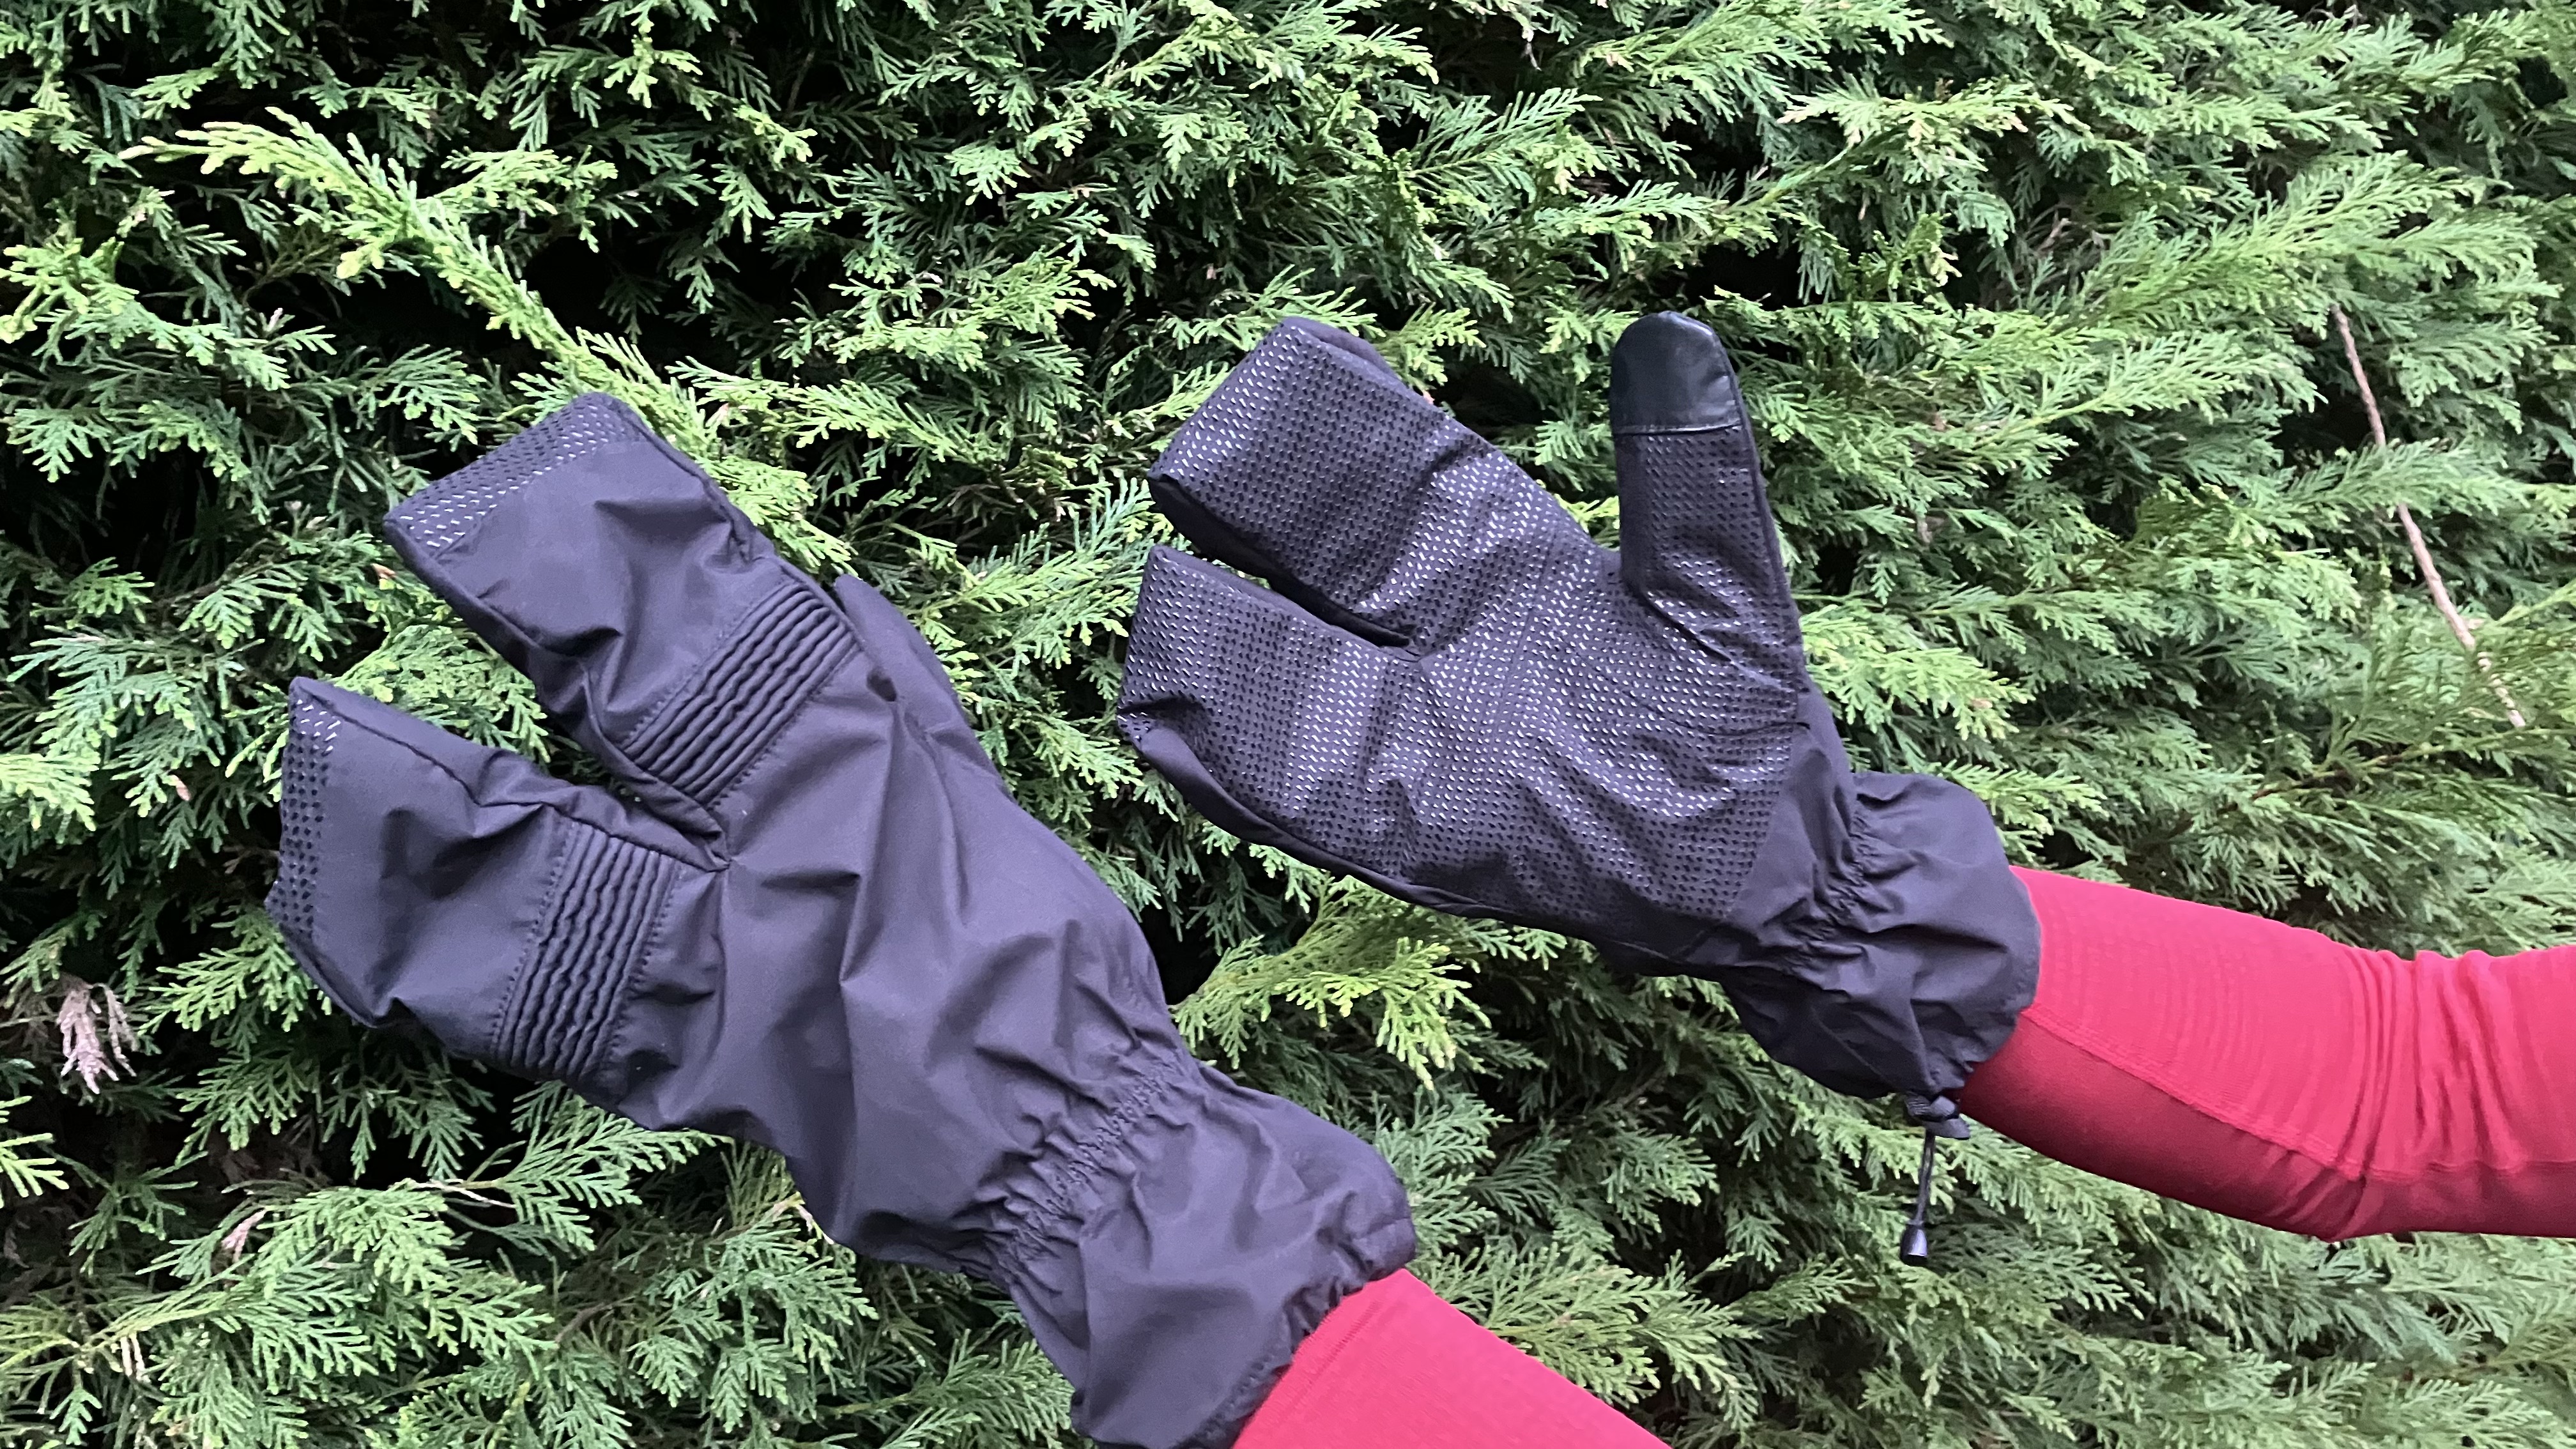 Sportful Lobster Gloves review – magic shell over-glove